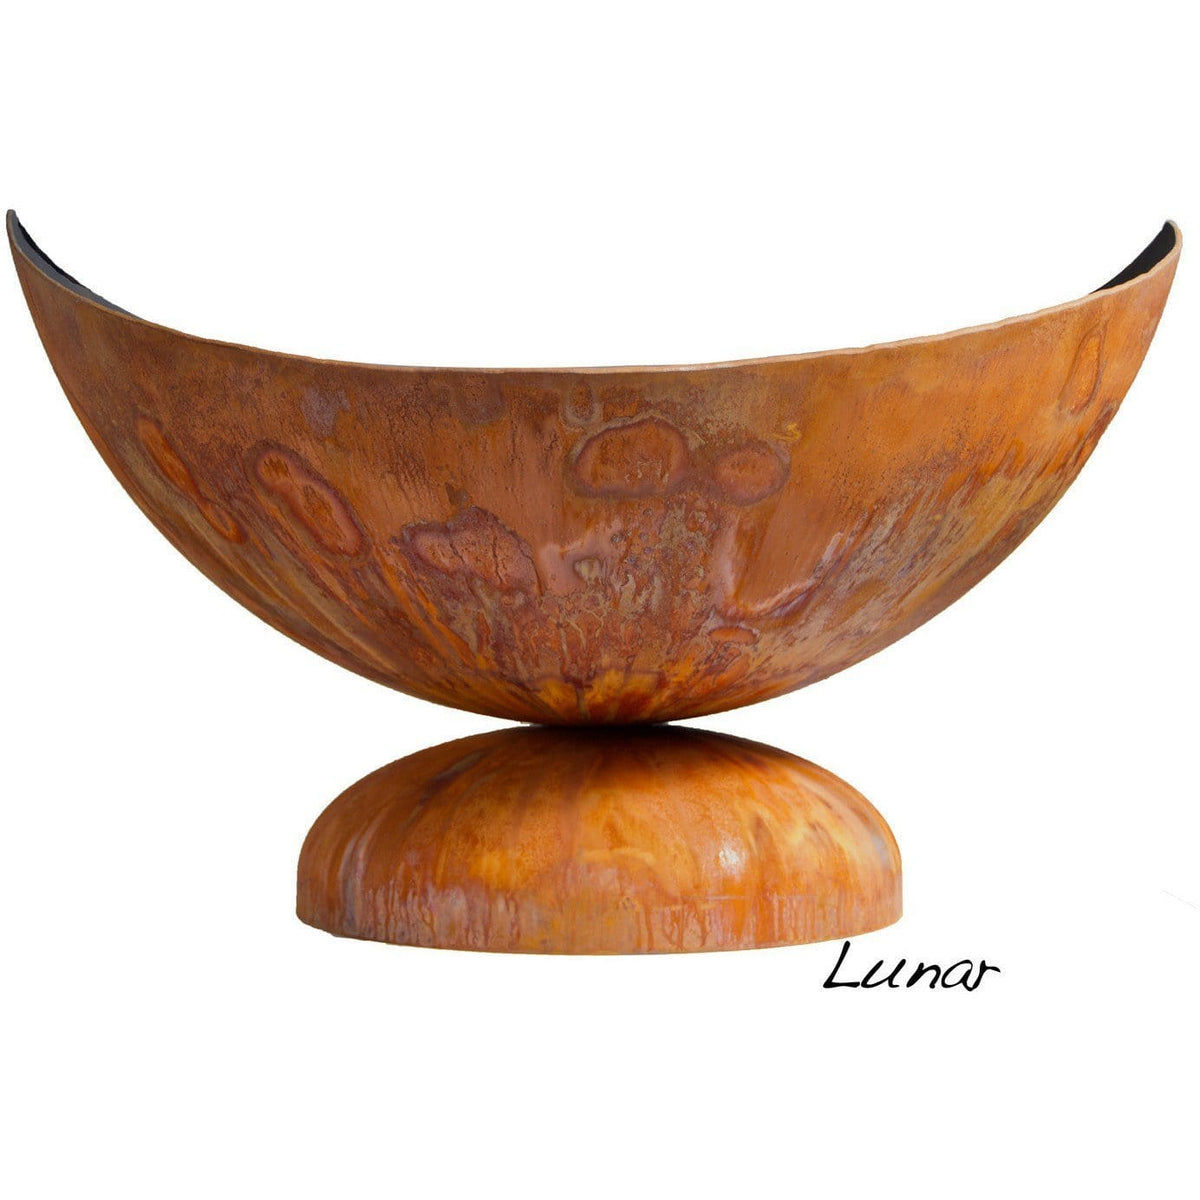 Lunar Artisan Fire Bowl by Ohio Flame: Outdoor Heating